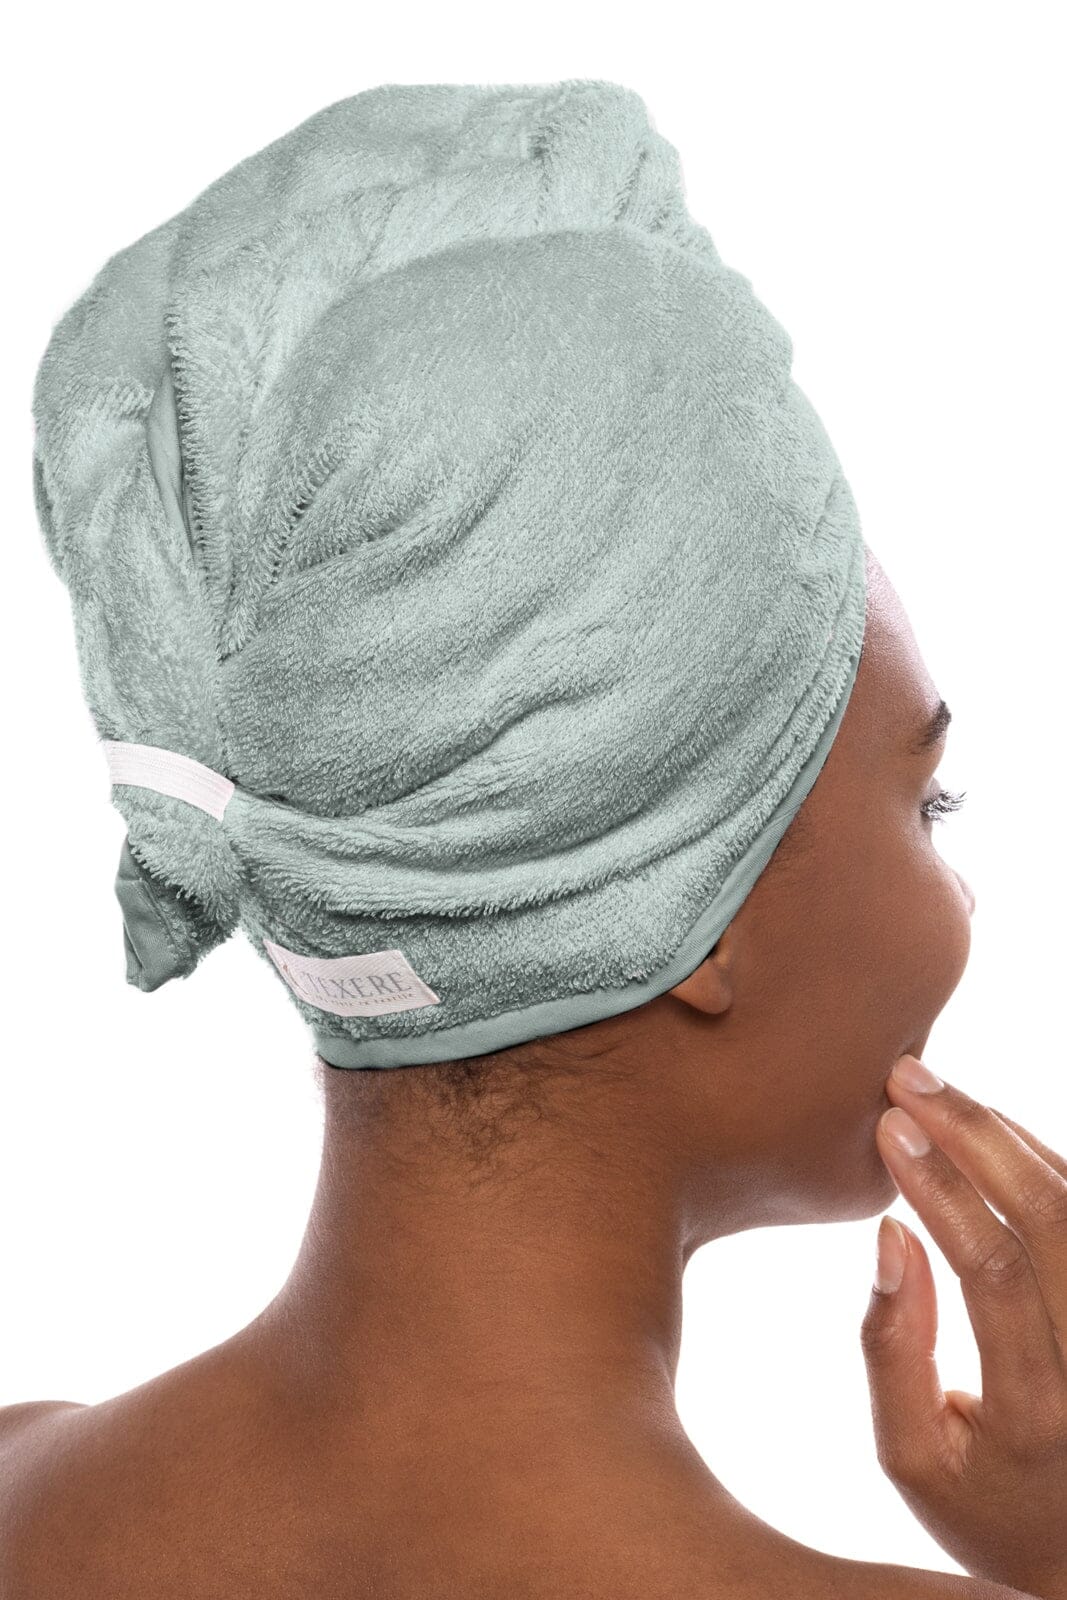 Texere Women's 2pc Terry Cloth Body and Hair Wrap